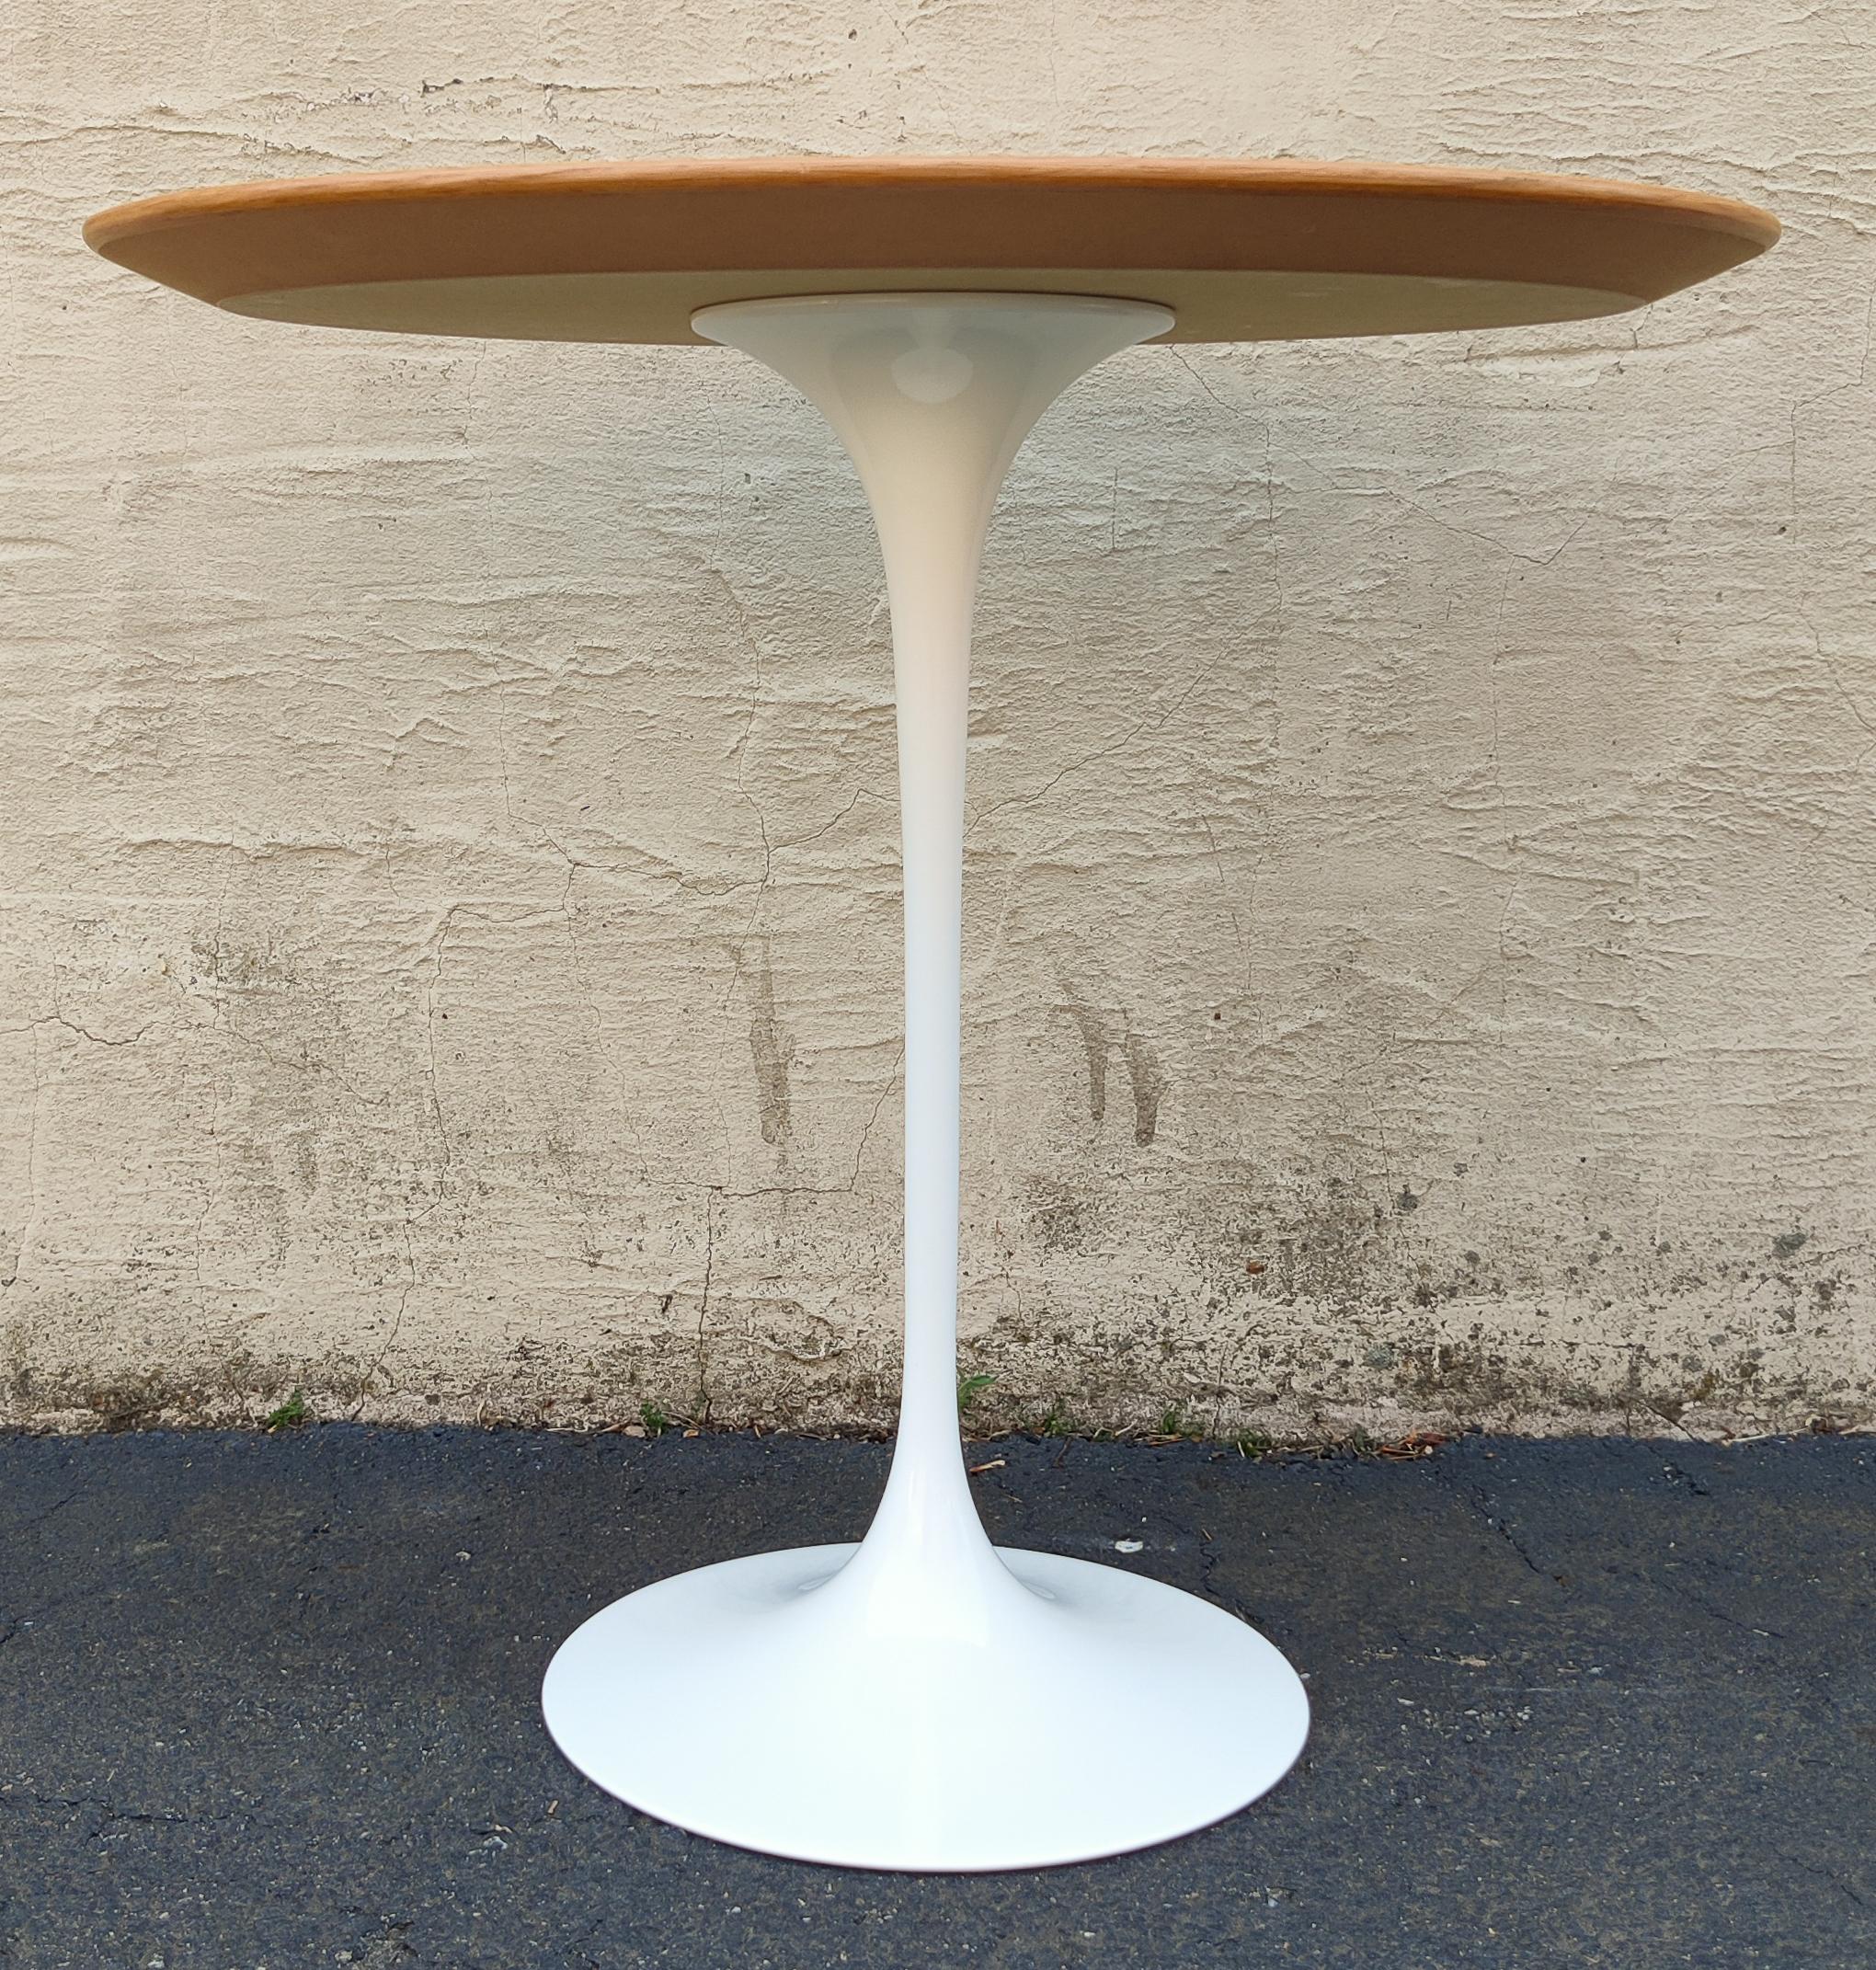 Designed by Eero Saarinen for Knoll in the 1950s, the Tulip line has expanded to many different tables and chairs. This example is a short and handsome side table make with a warm stained oak and a cast iron white enameled base. This contrast is